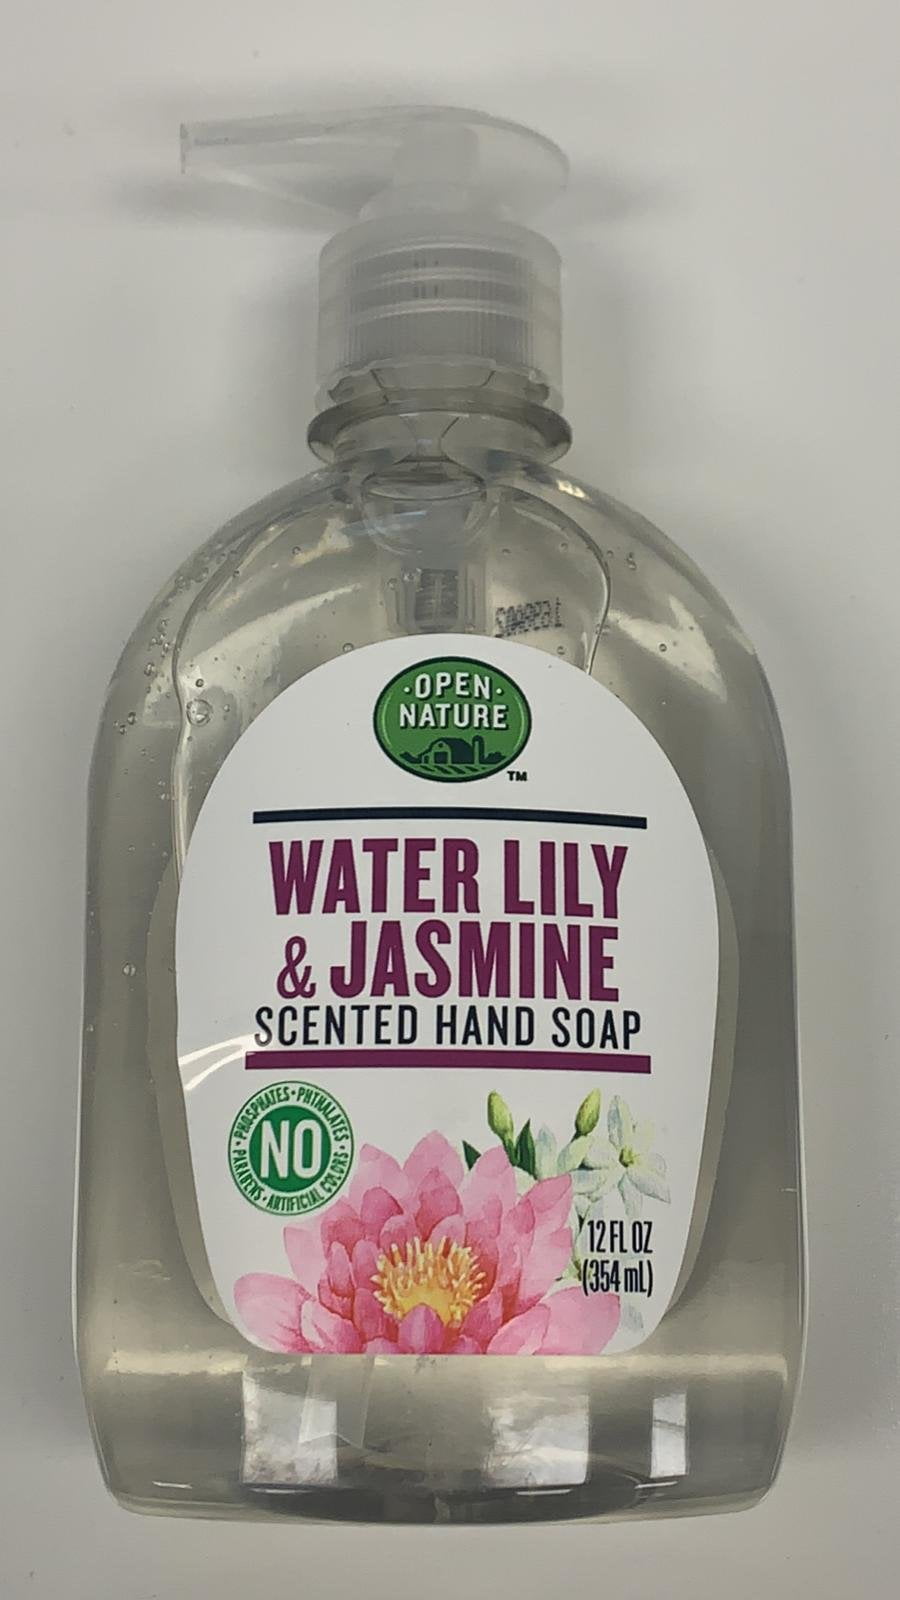 Open Nature Scented Hand Soap. Water Lily & Jasmine, 12 fl.oz, Pack of